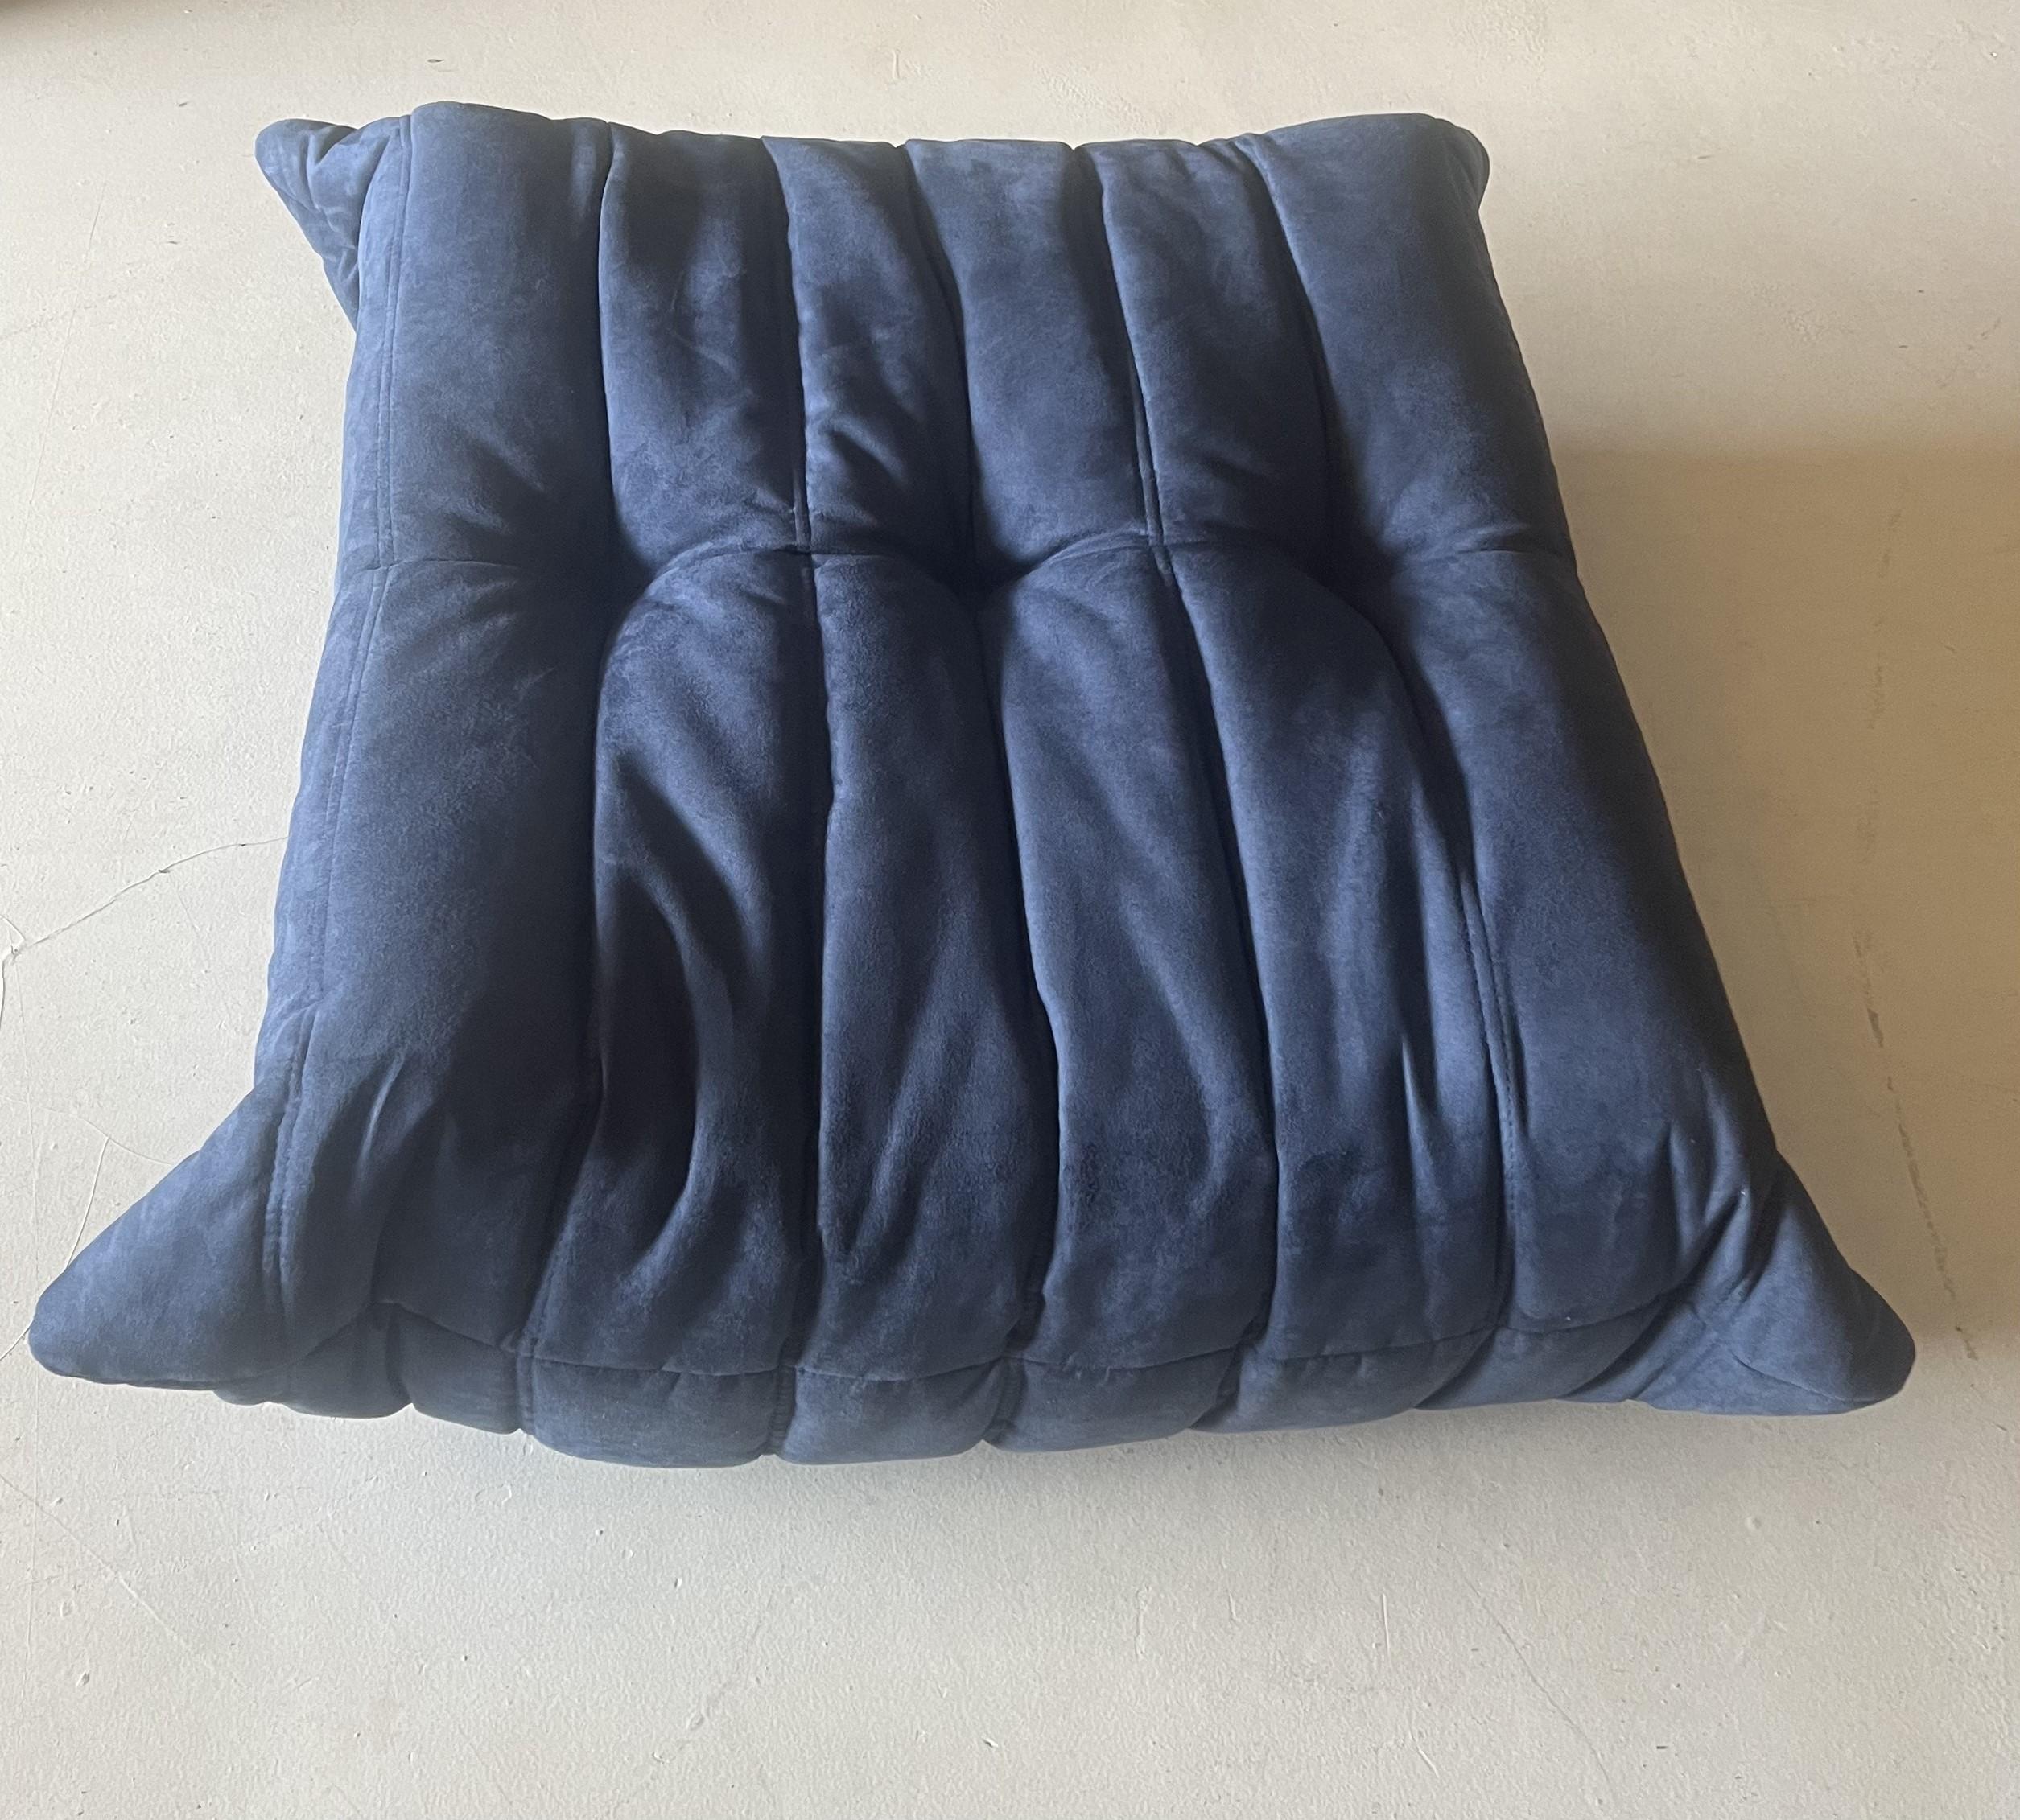 Late 20th Century Ligne Roset by Michel Ducaroy Togo Blue Footstool